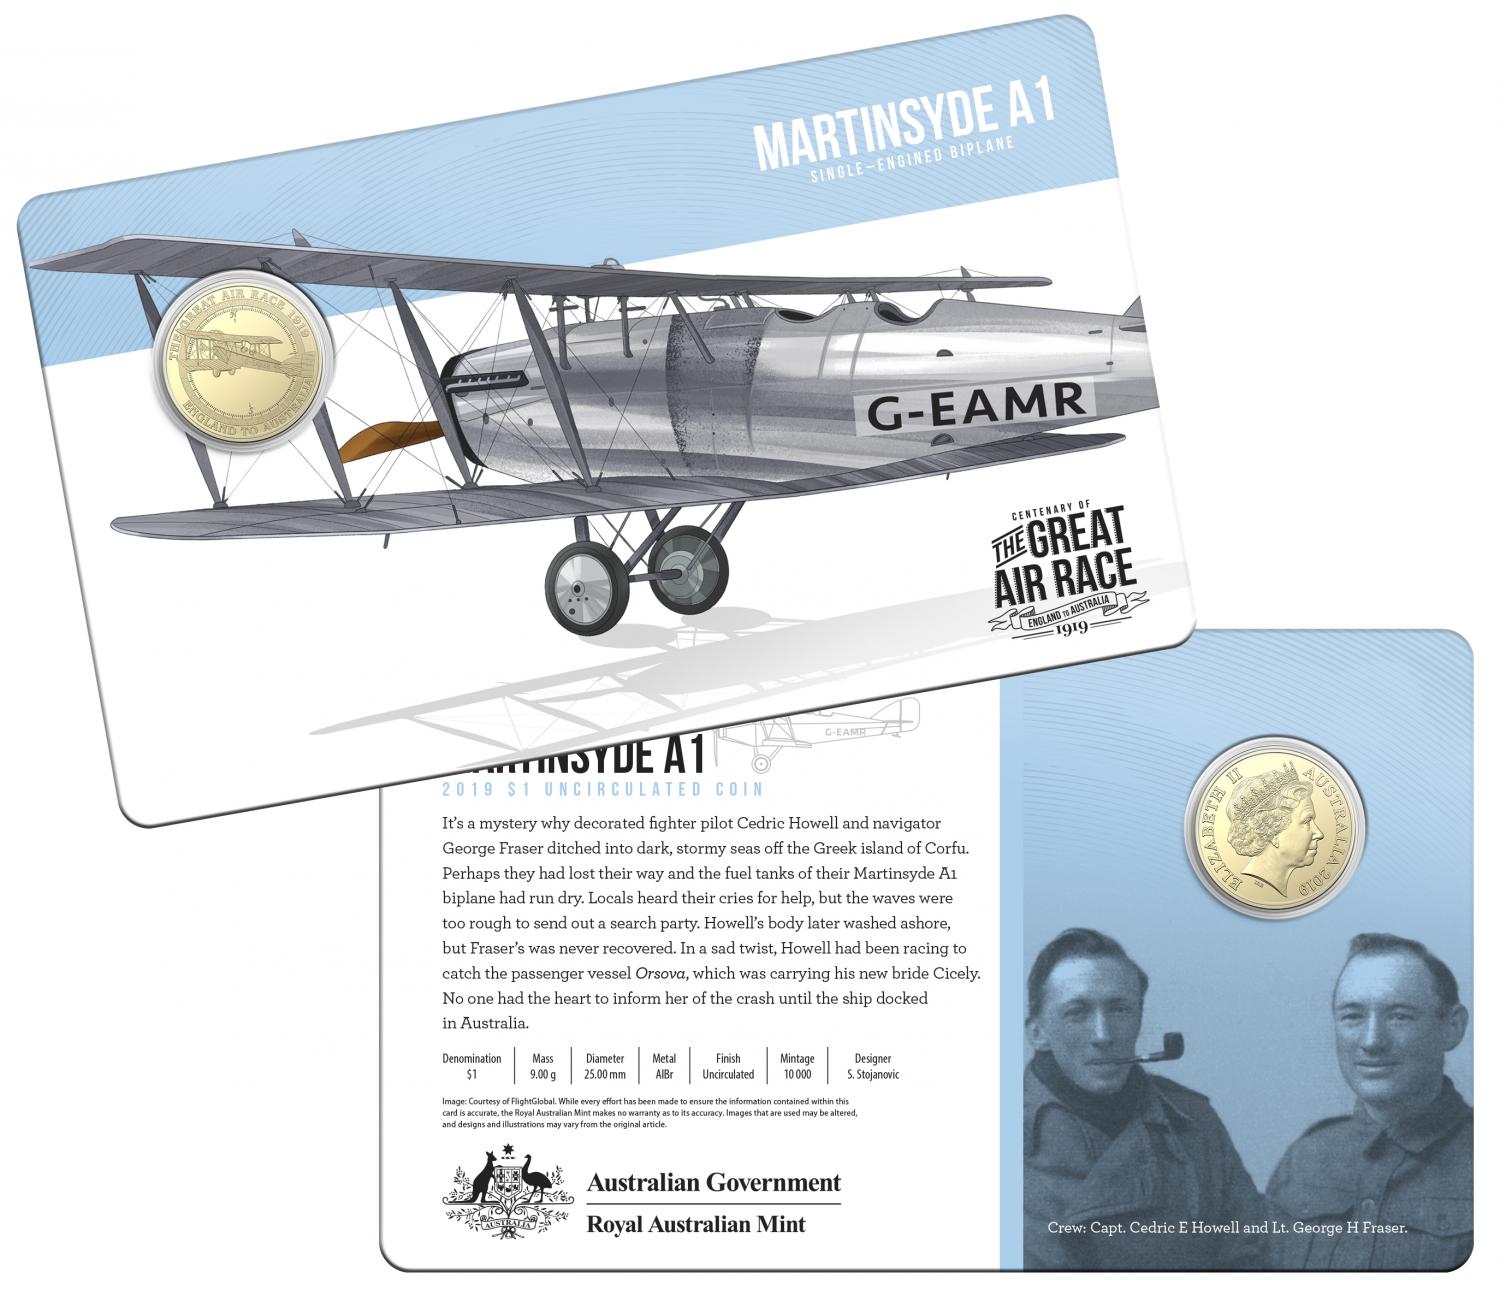 Thumbnail for 2019 Centenary off the Great Air Race Uncirculated $1.00 - Martinsyde A1